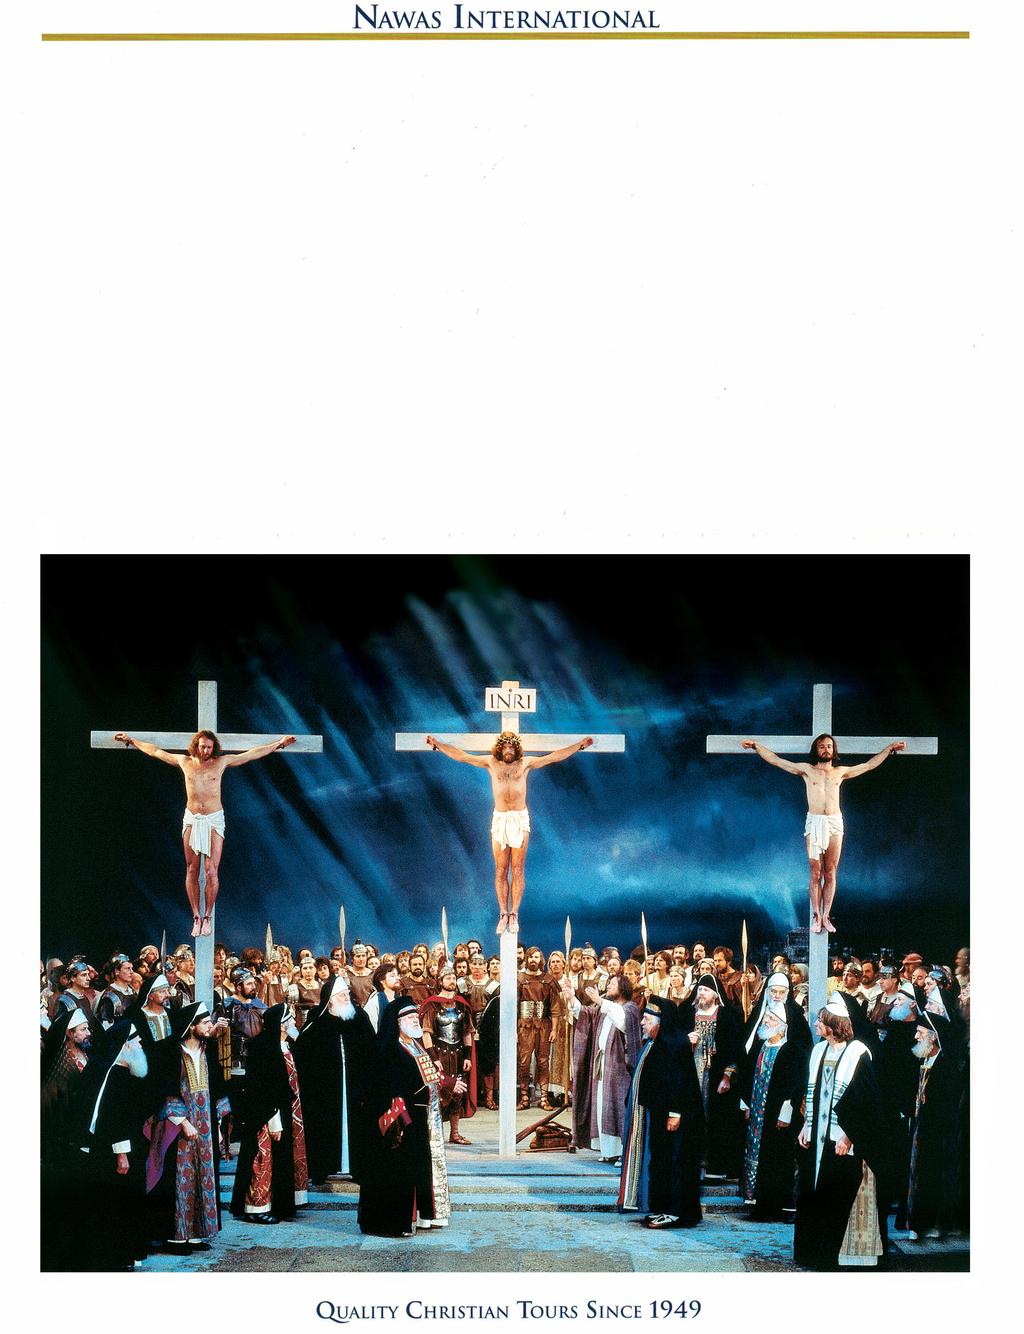 HEART EUROPE Heart OF of Europe Including The Passion Play Of Oberammergau Including the Passion Play of Oberammergau 12 Days: June 28 - July 9, 2020 12 Days: June 28 - July 9, 2020 visiting visiting